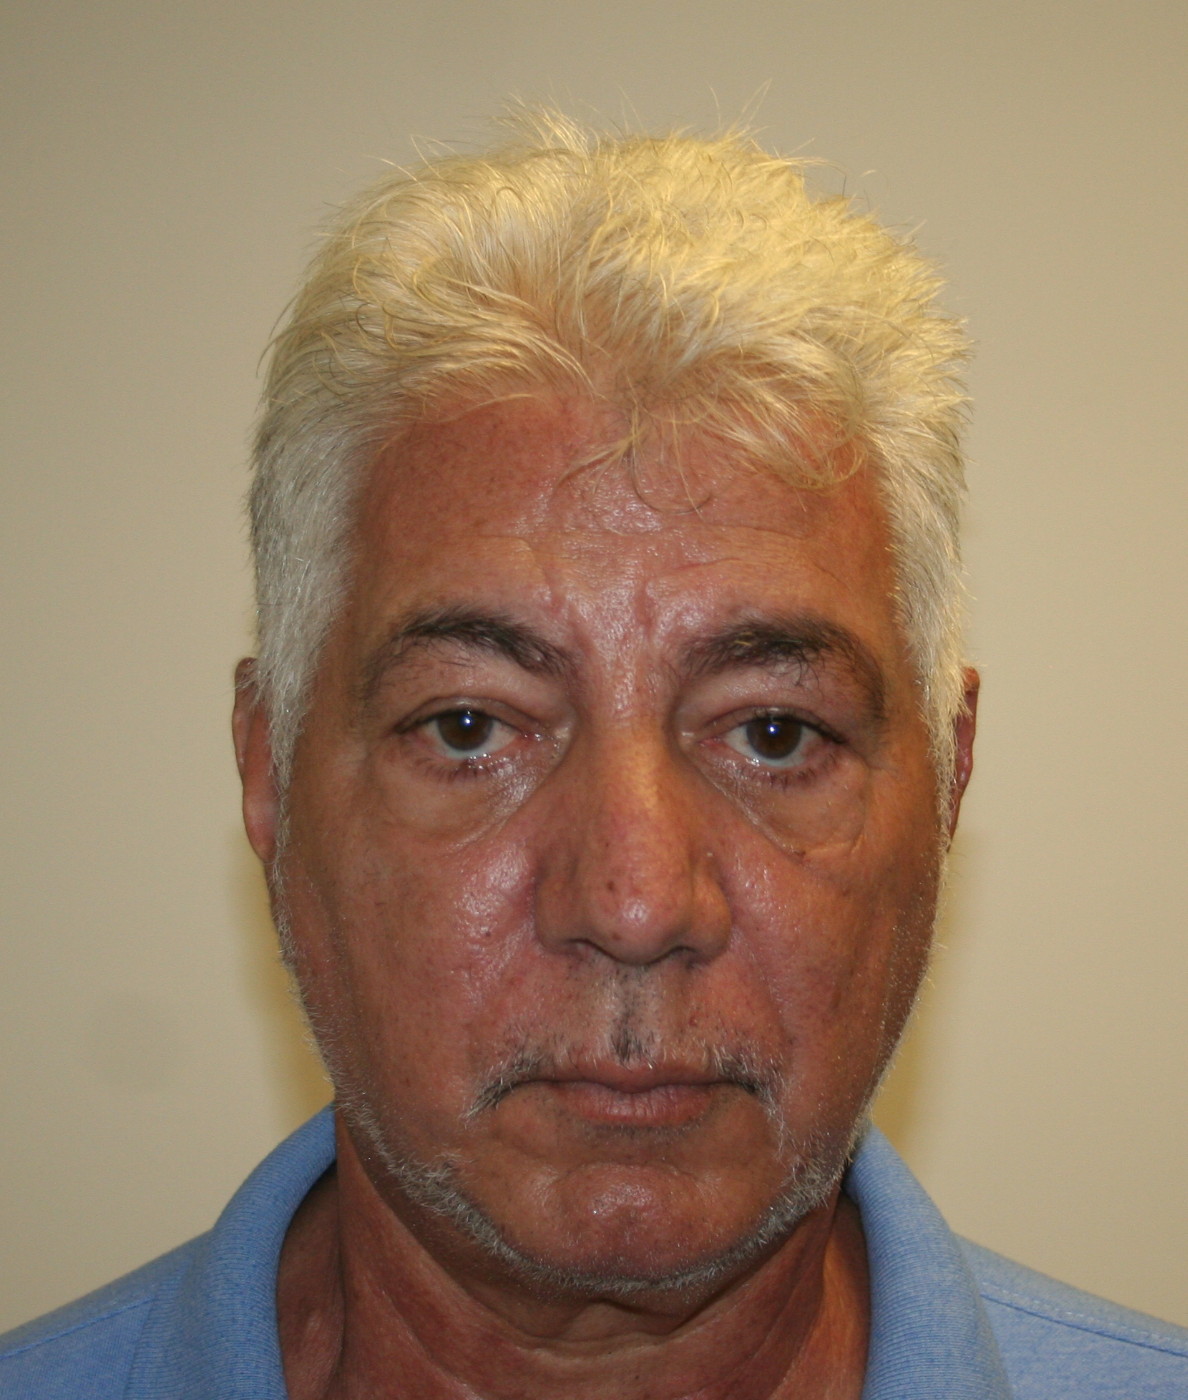 Gennaro Festa, a contractor from Freeport, allegedly stole more than $110,000 from a church in Mineola, according to Nassau County District Attorney Madeline Singas. He has pled not guilty. (Photo courtesy of the Nassau County district attorney)